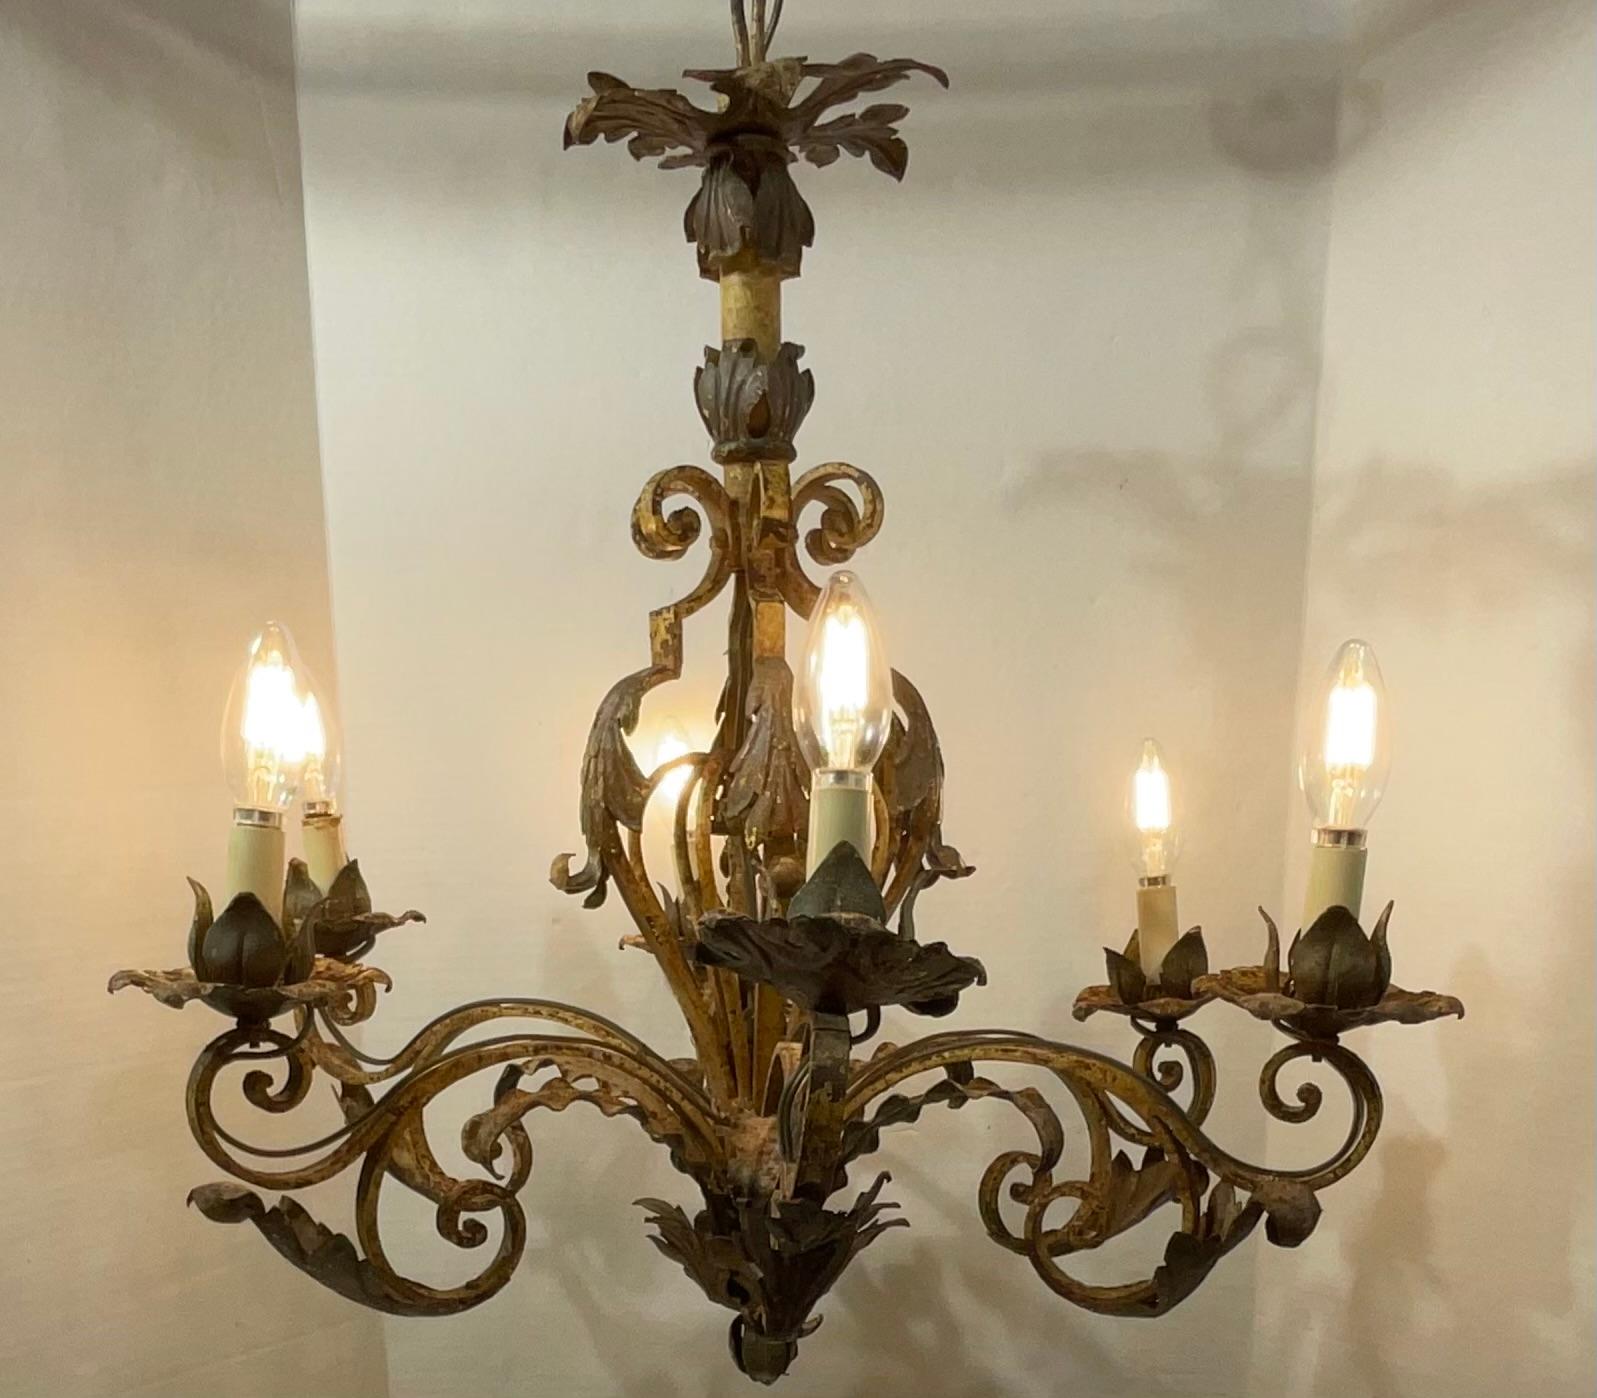 Elegant Six armed hand-forged iron chandelier, old mizner style,
Great decorative chandelier.